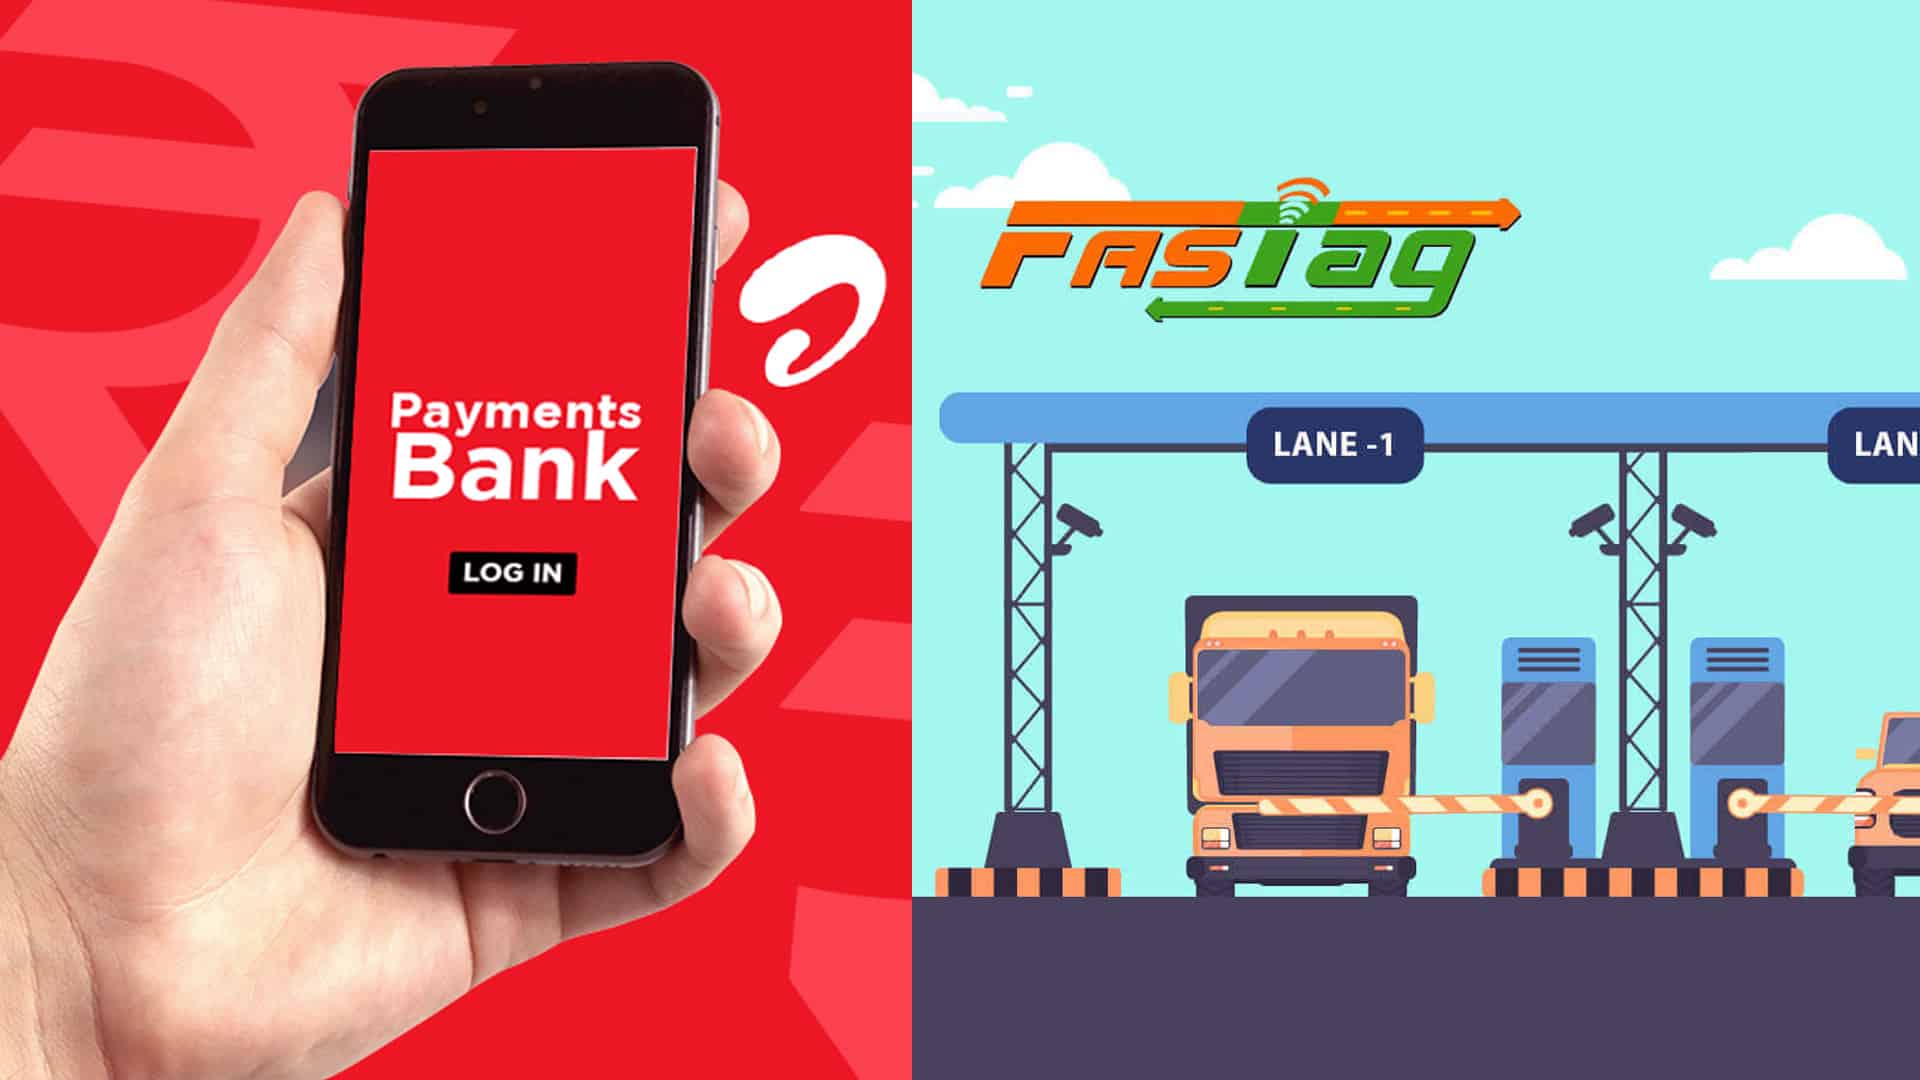 Airtel Payments Bank, Park+ tie up to offer FASTag-based smart parking solutions